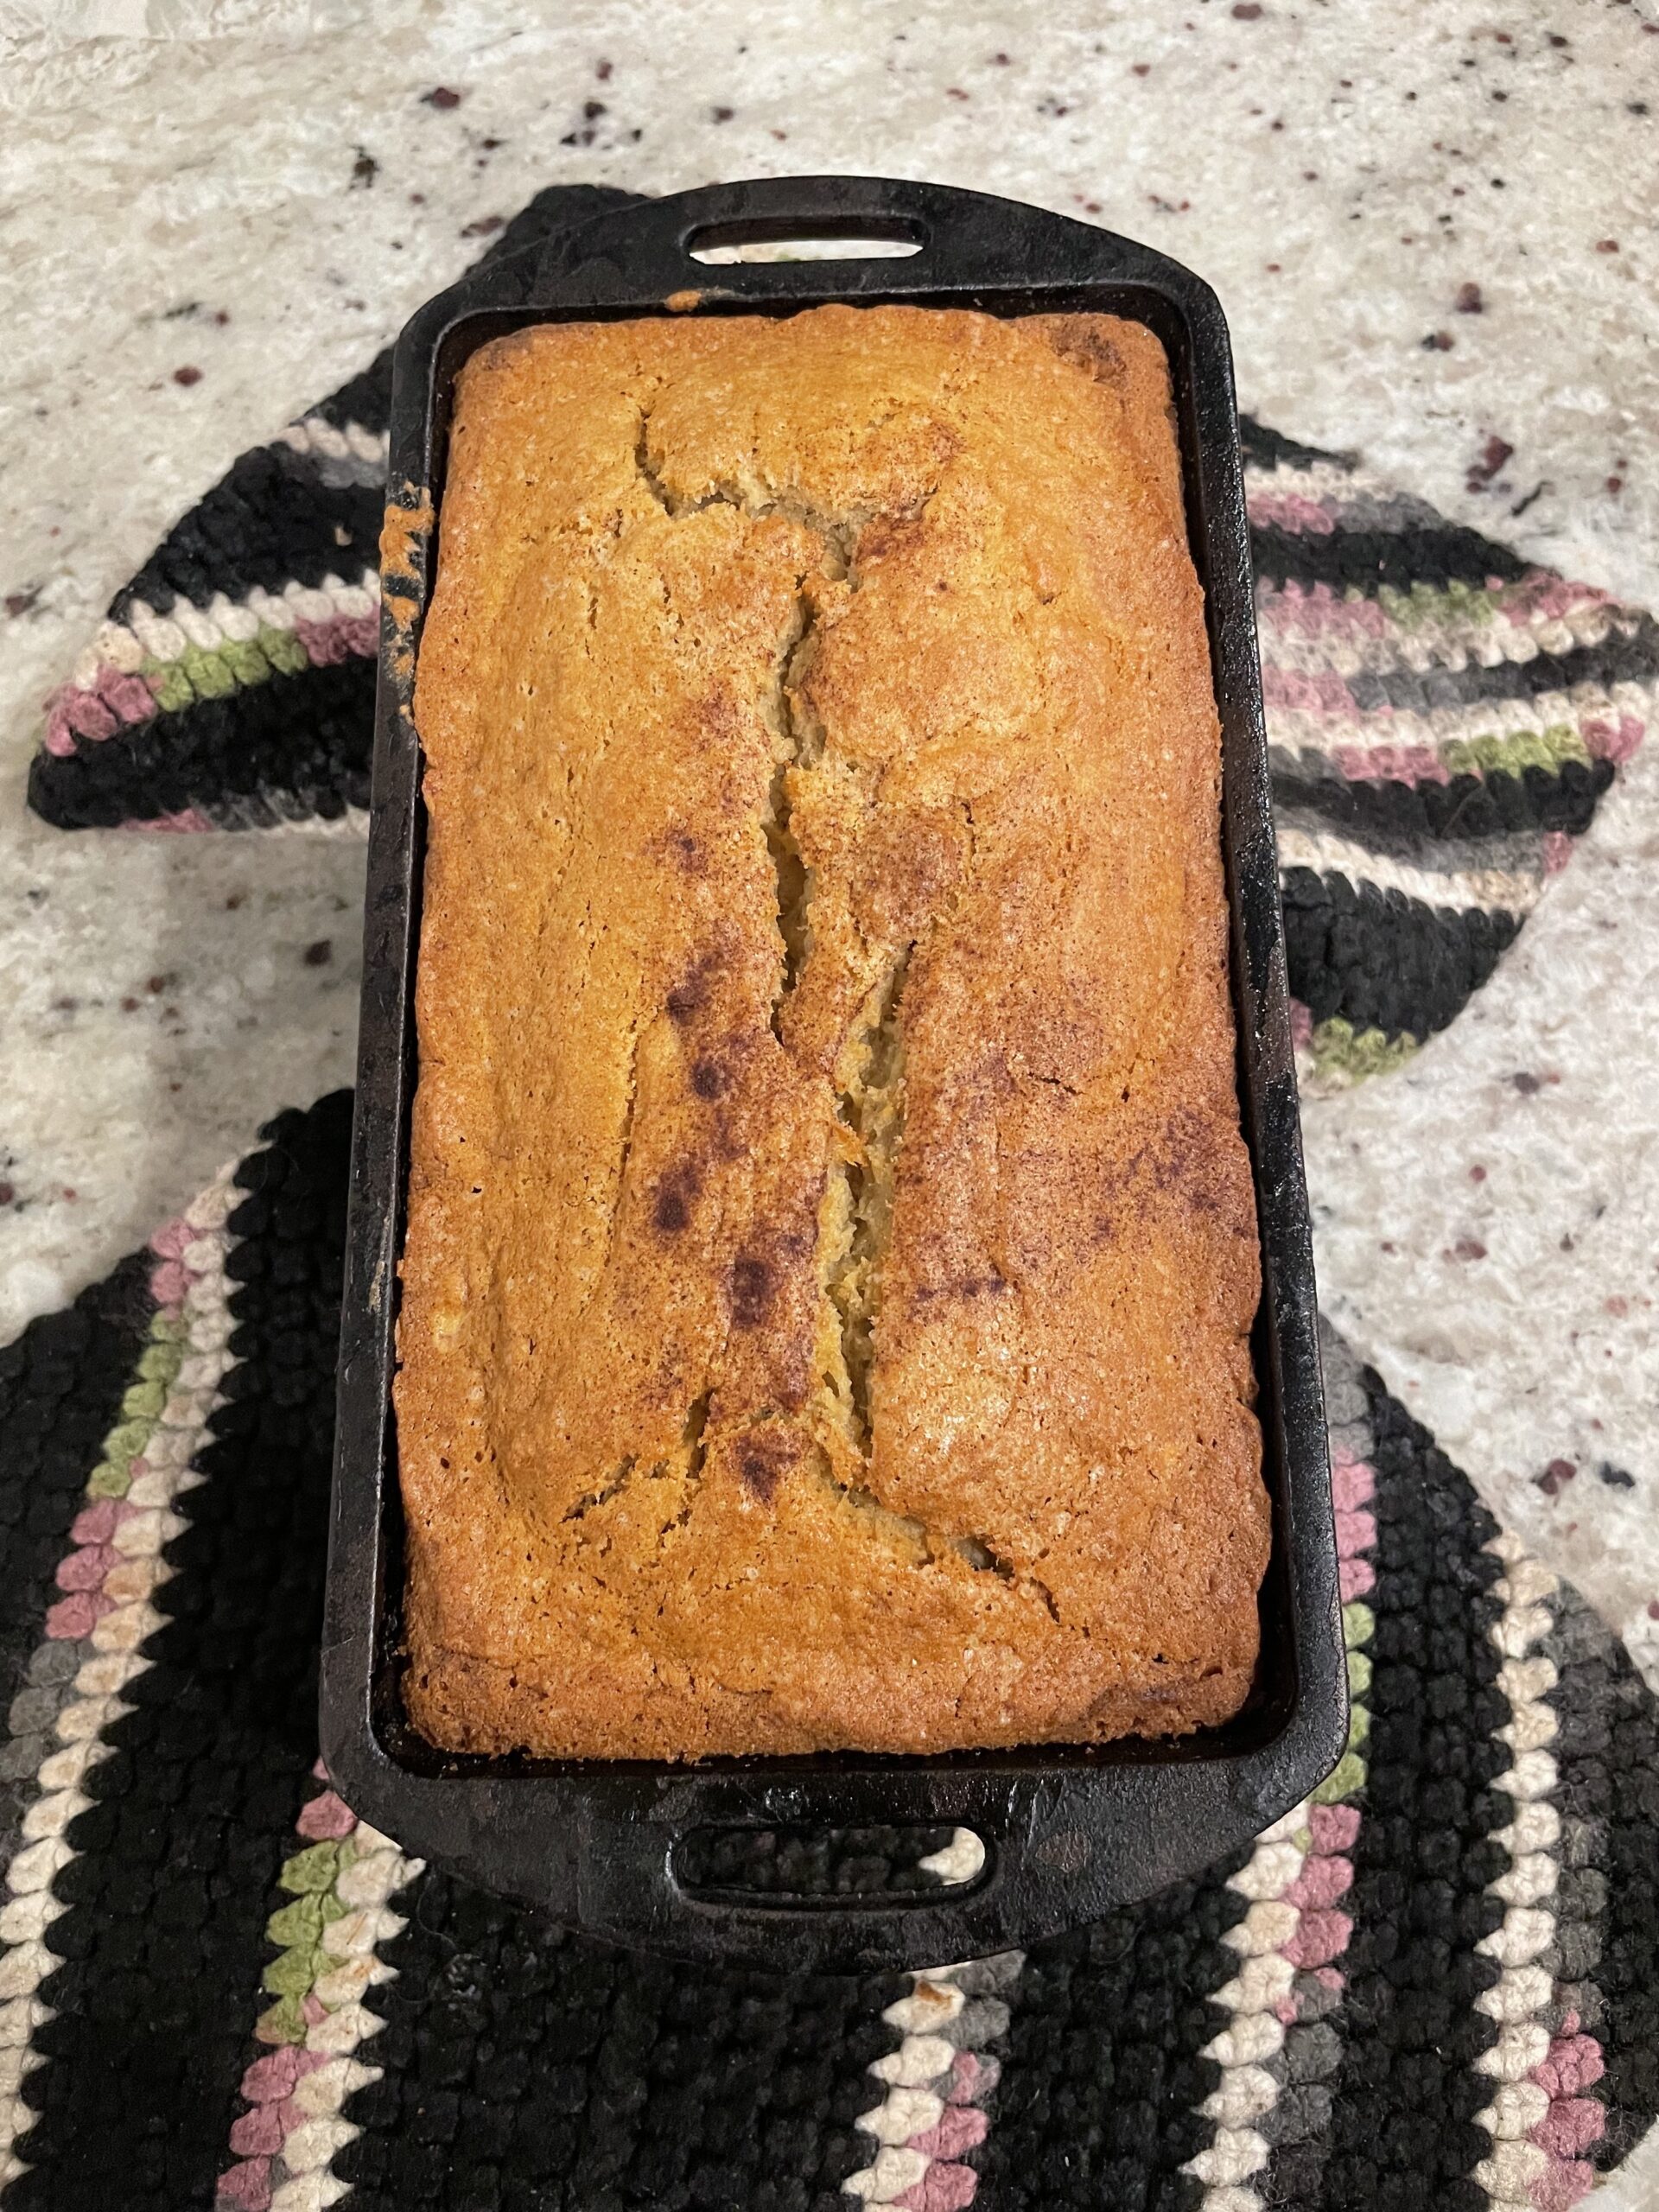 A warm loaf of banana bread rests in a cast iron pan.